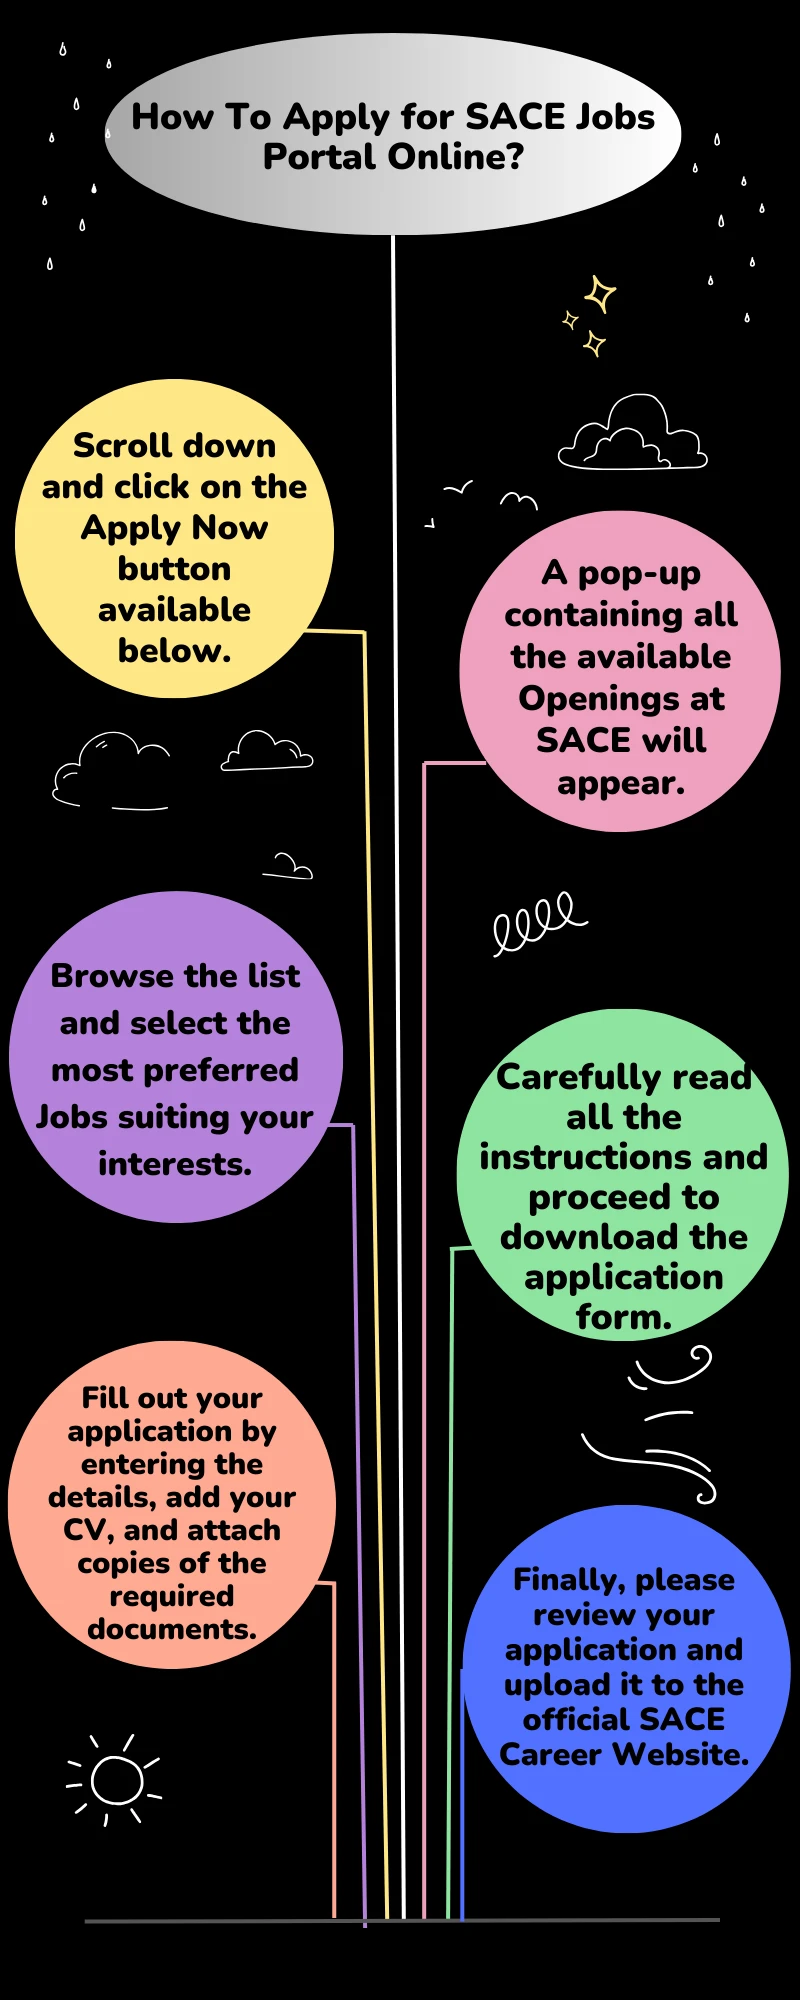 How To Apply for SACE Jobs Portal Online?